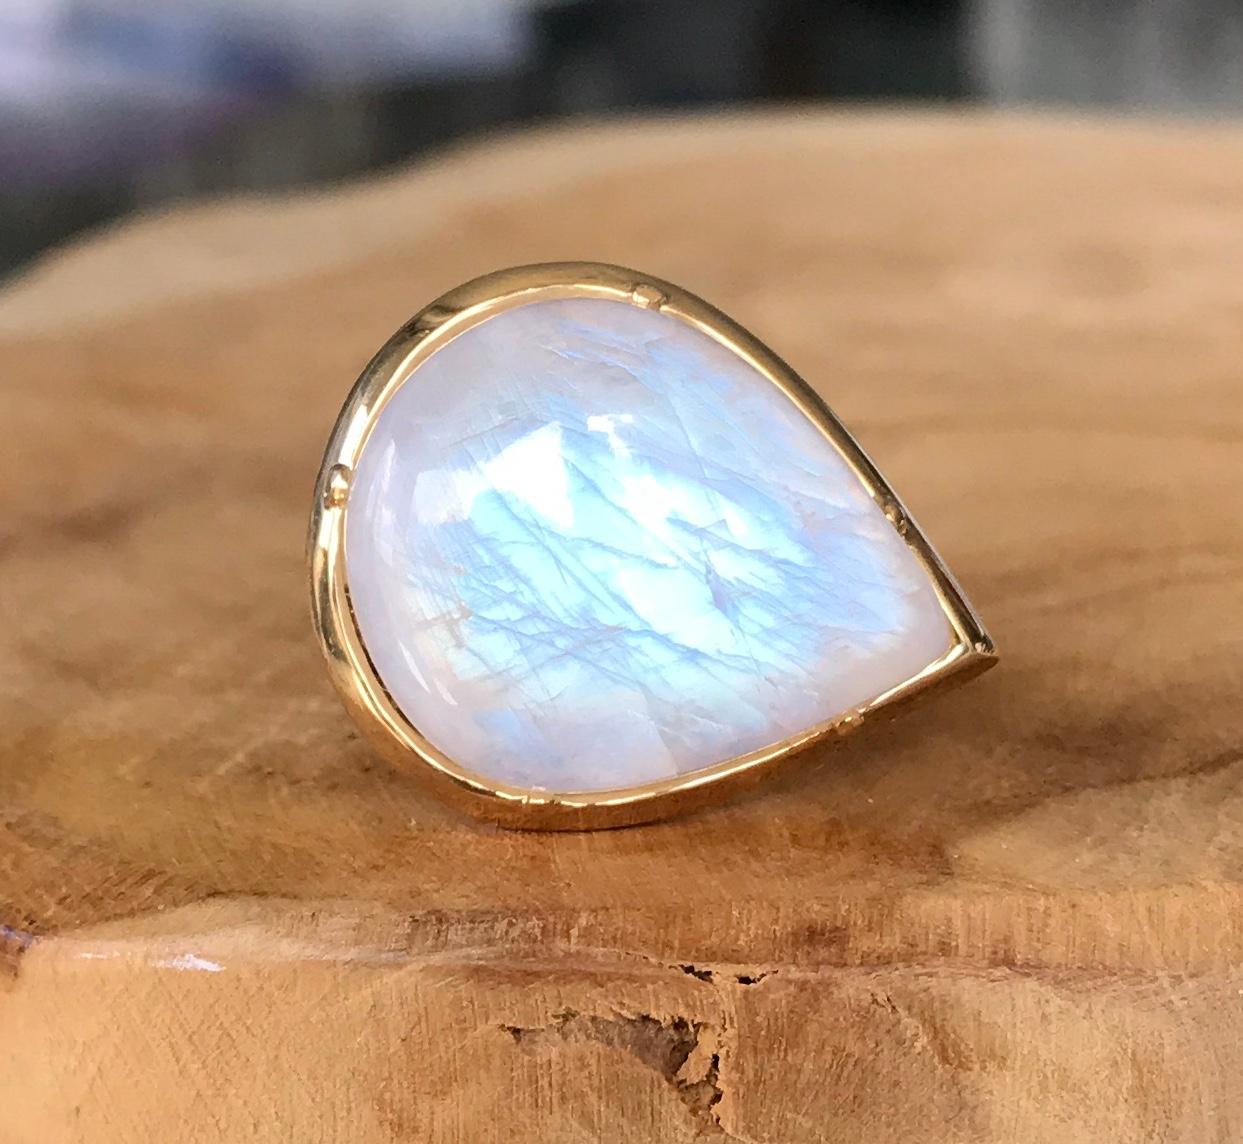 This exquisite Joon Han rainbow moonstone cocktail ring radiates the telltale flashes of blue when reflected in the light. Cut in an elegant fancy cabochon pear shape and handcrafted in 18K yellow gold, it makes a simple but strong statement. Wear